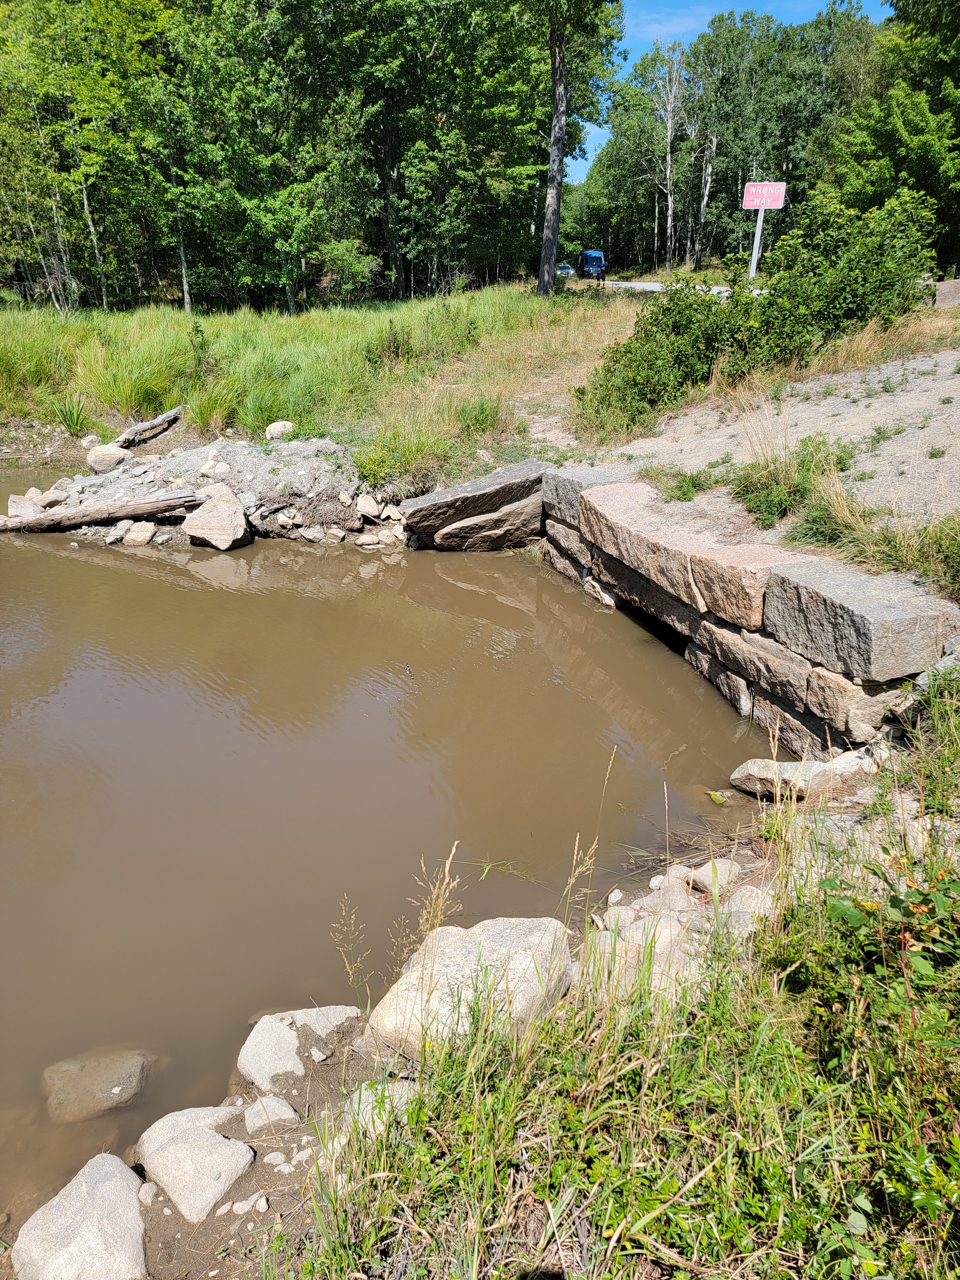 A pool of muddy water is blocked by a clogged stone culvert beneath a road.